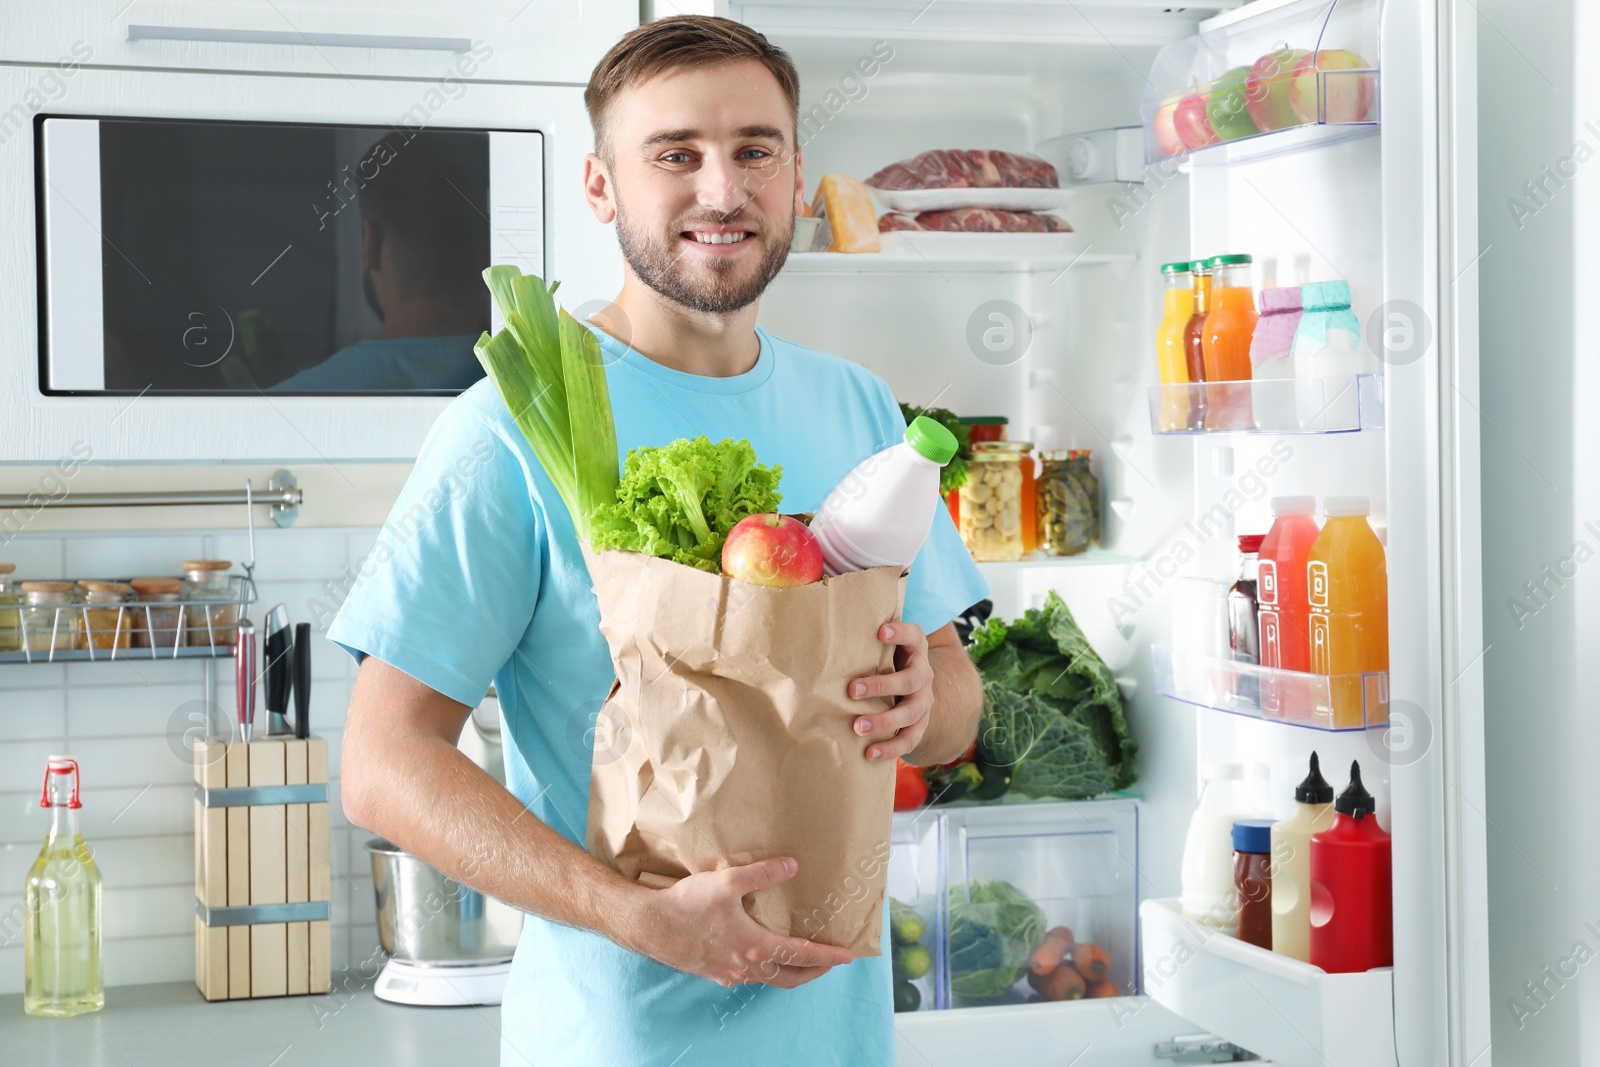 Photo of Man with bag of products standing near refrigerator in kitchen